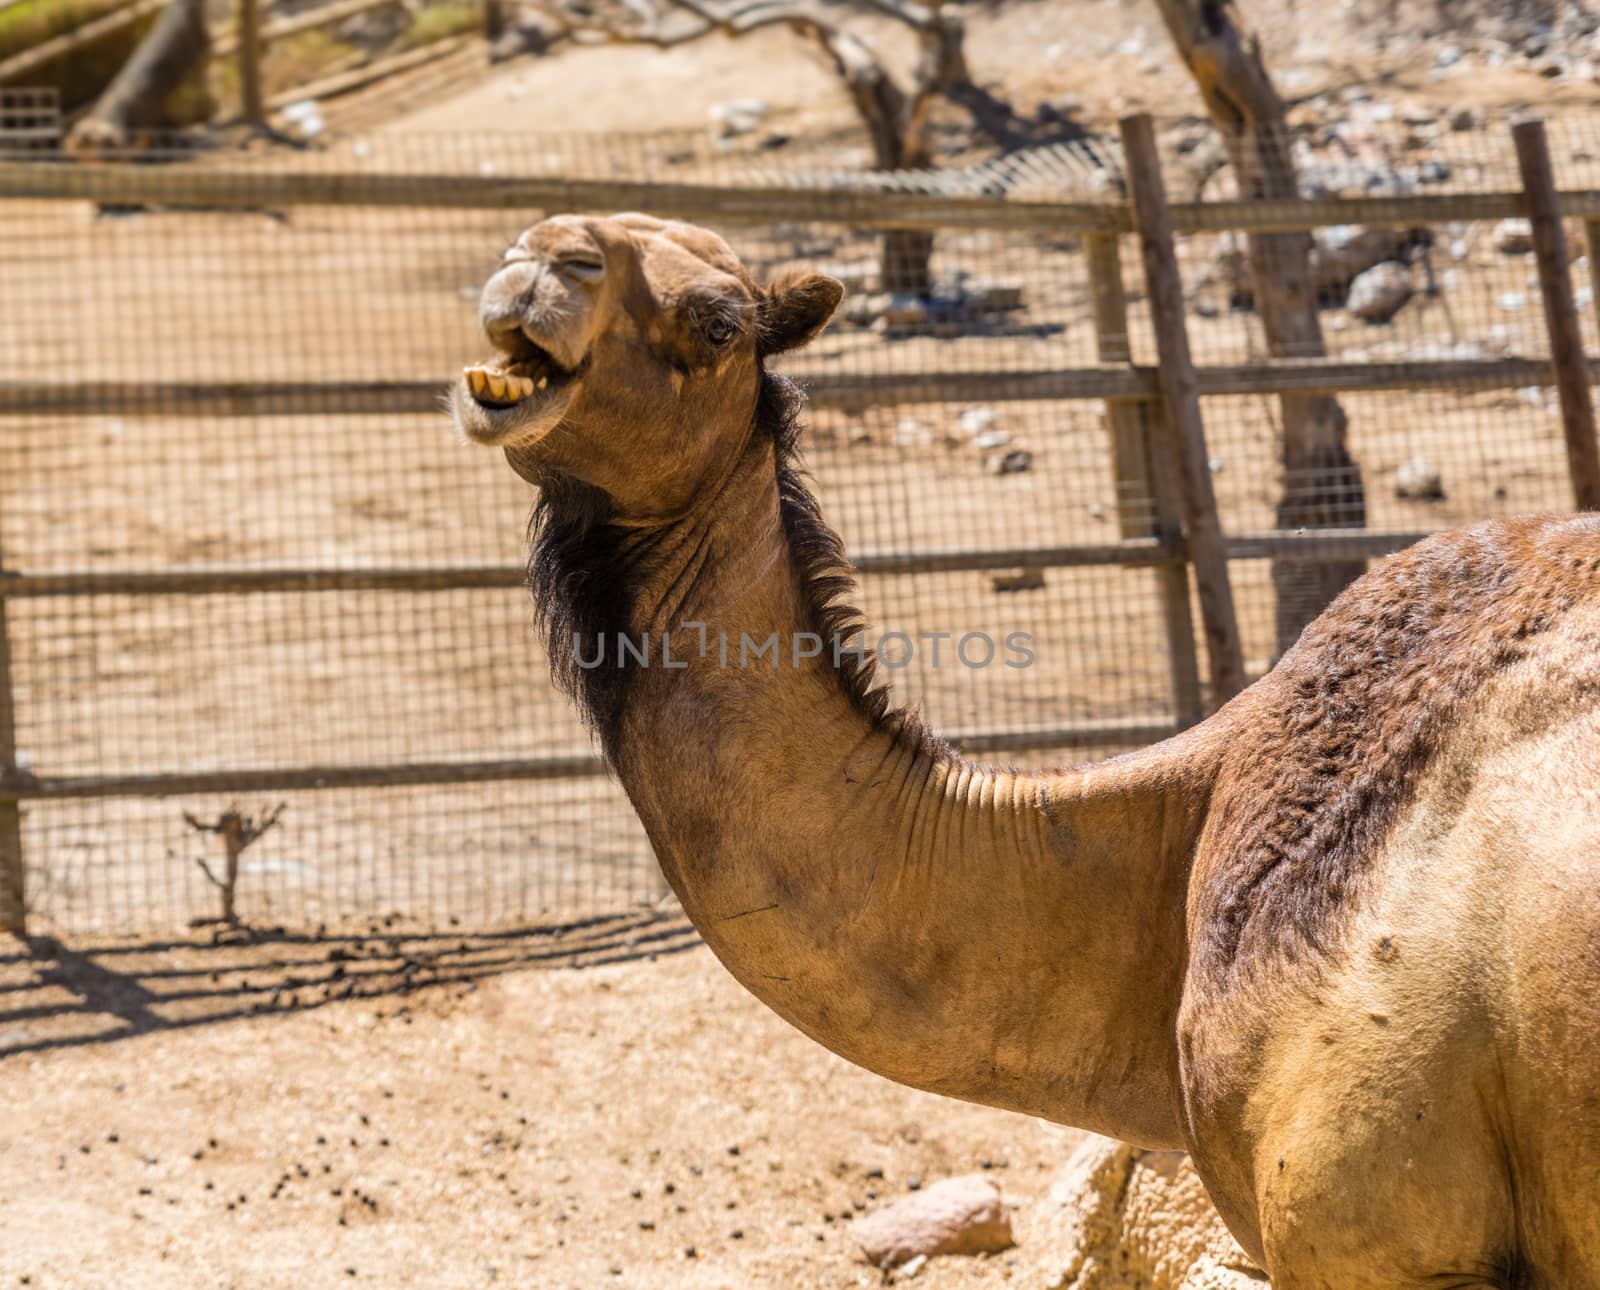 camels smiling by jcdiazhidalgo